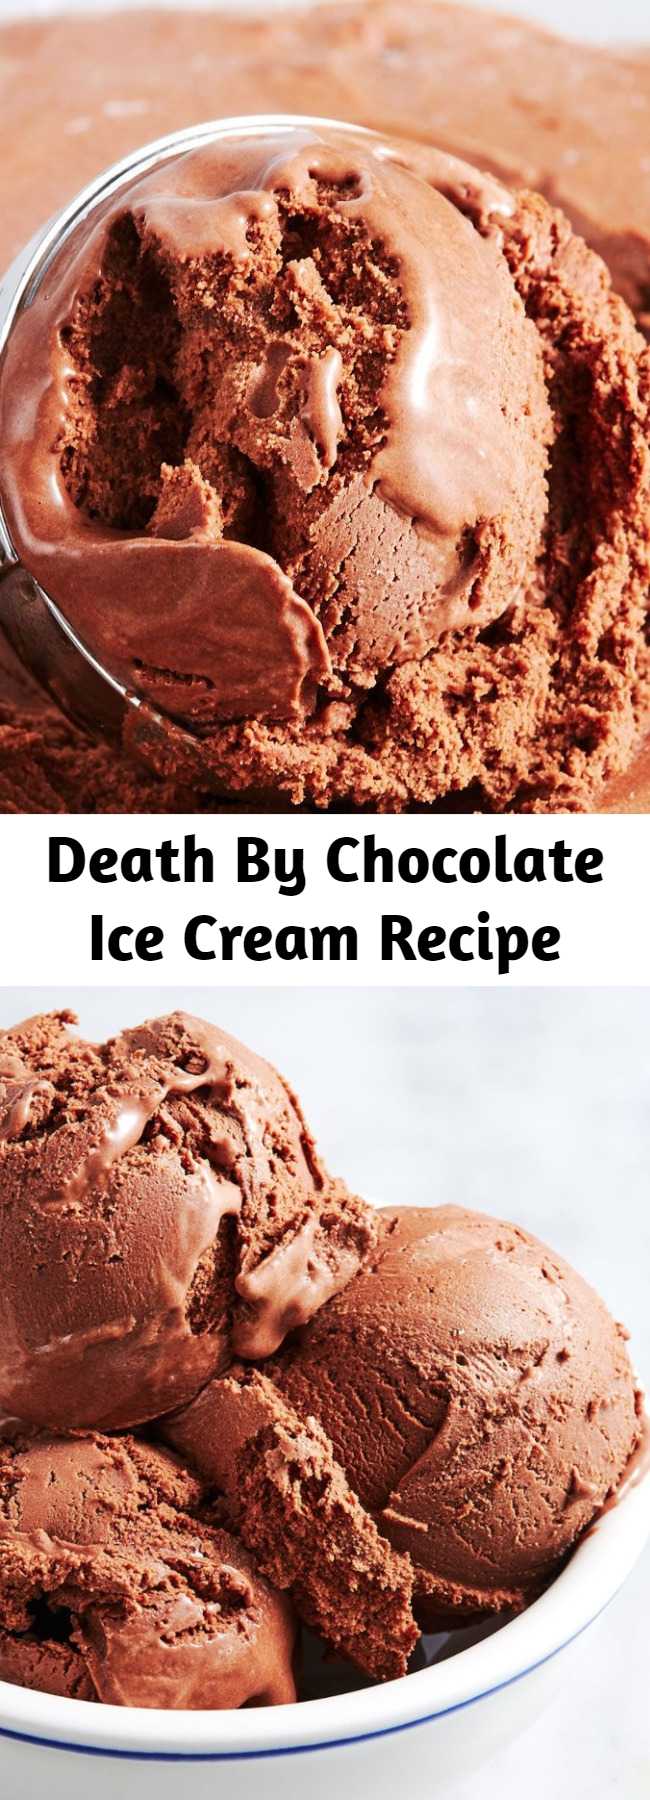 Death By Chocolate Ice Cream Recipe - Forget the freezer aisle and try your hand at homemade Chocolate Ice Cream with this recipe.